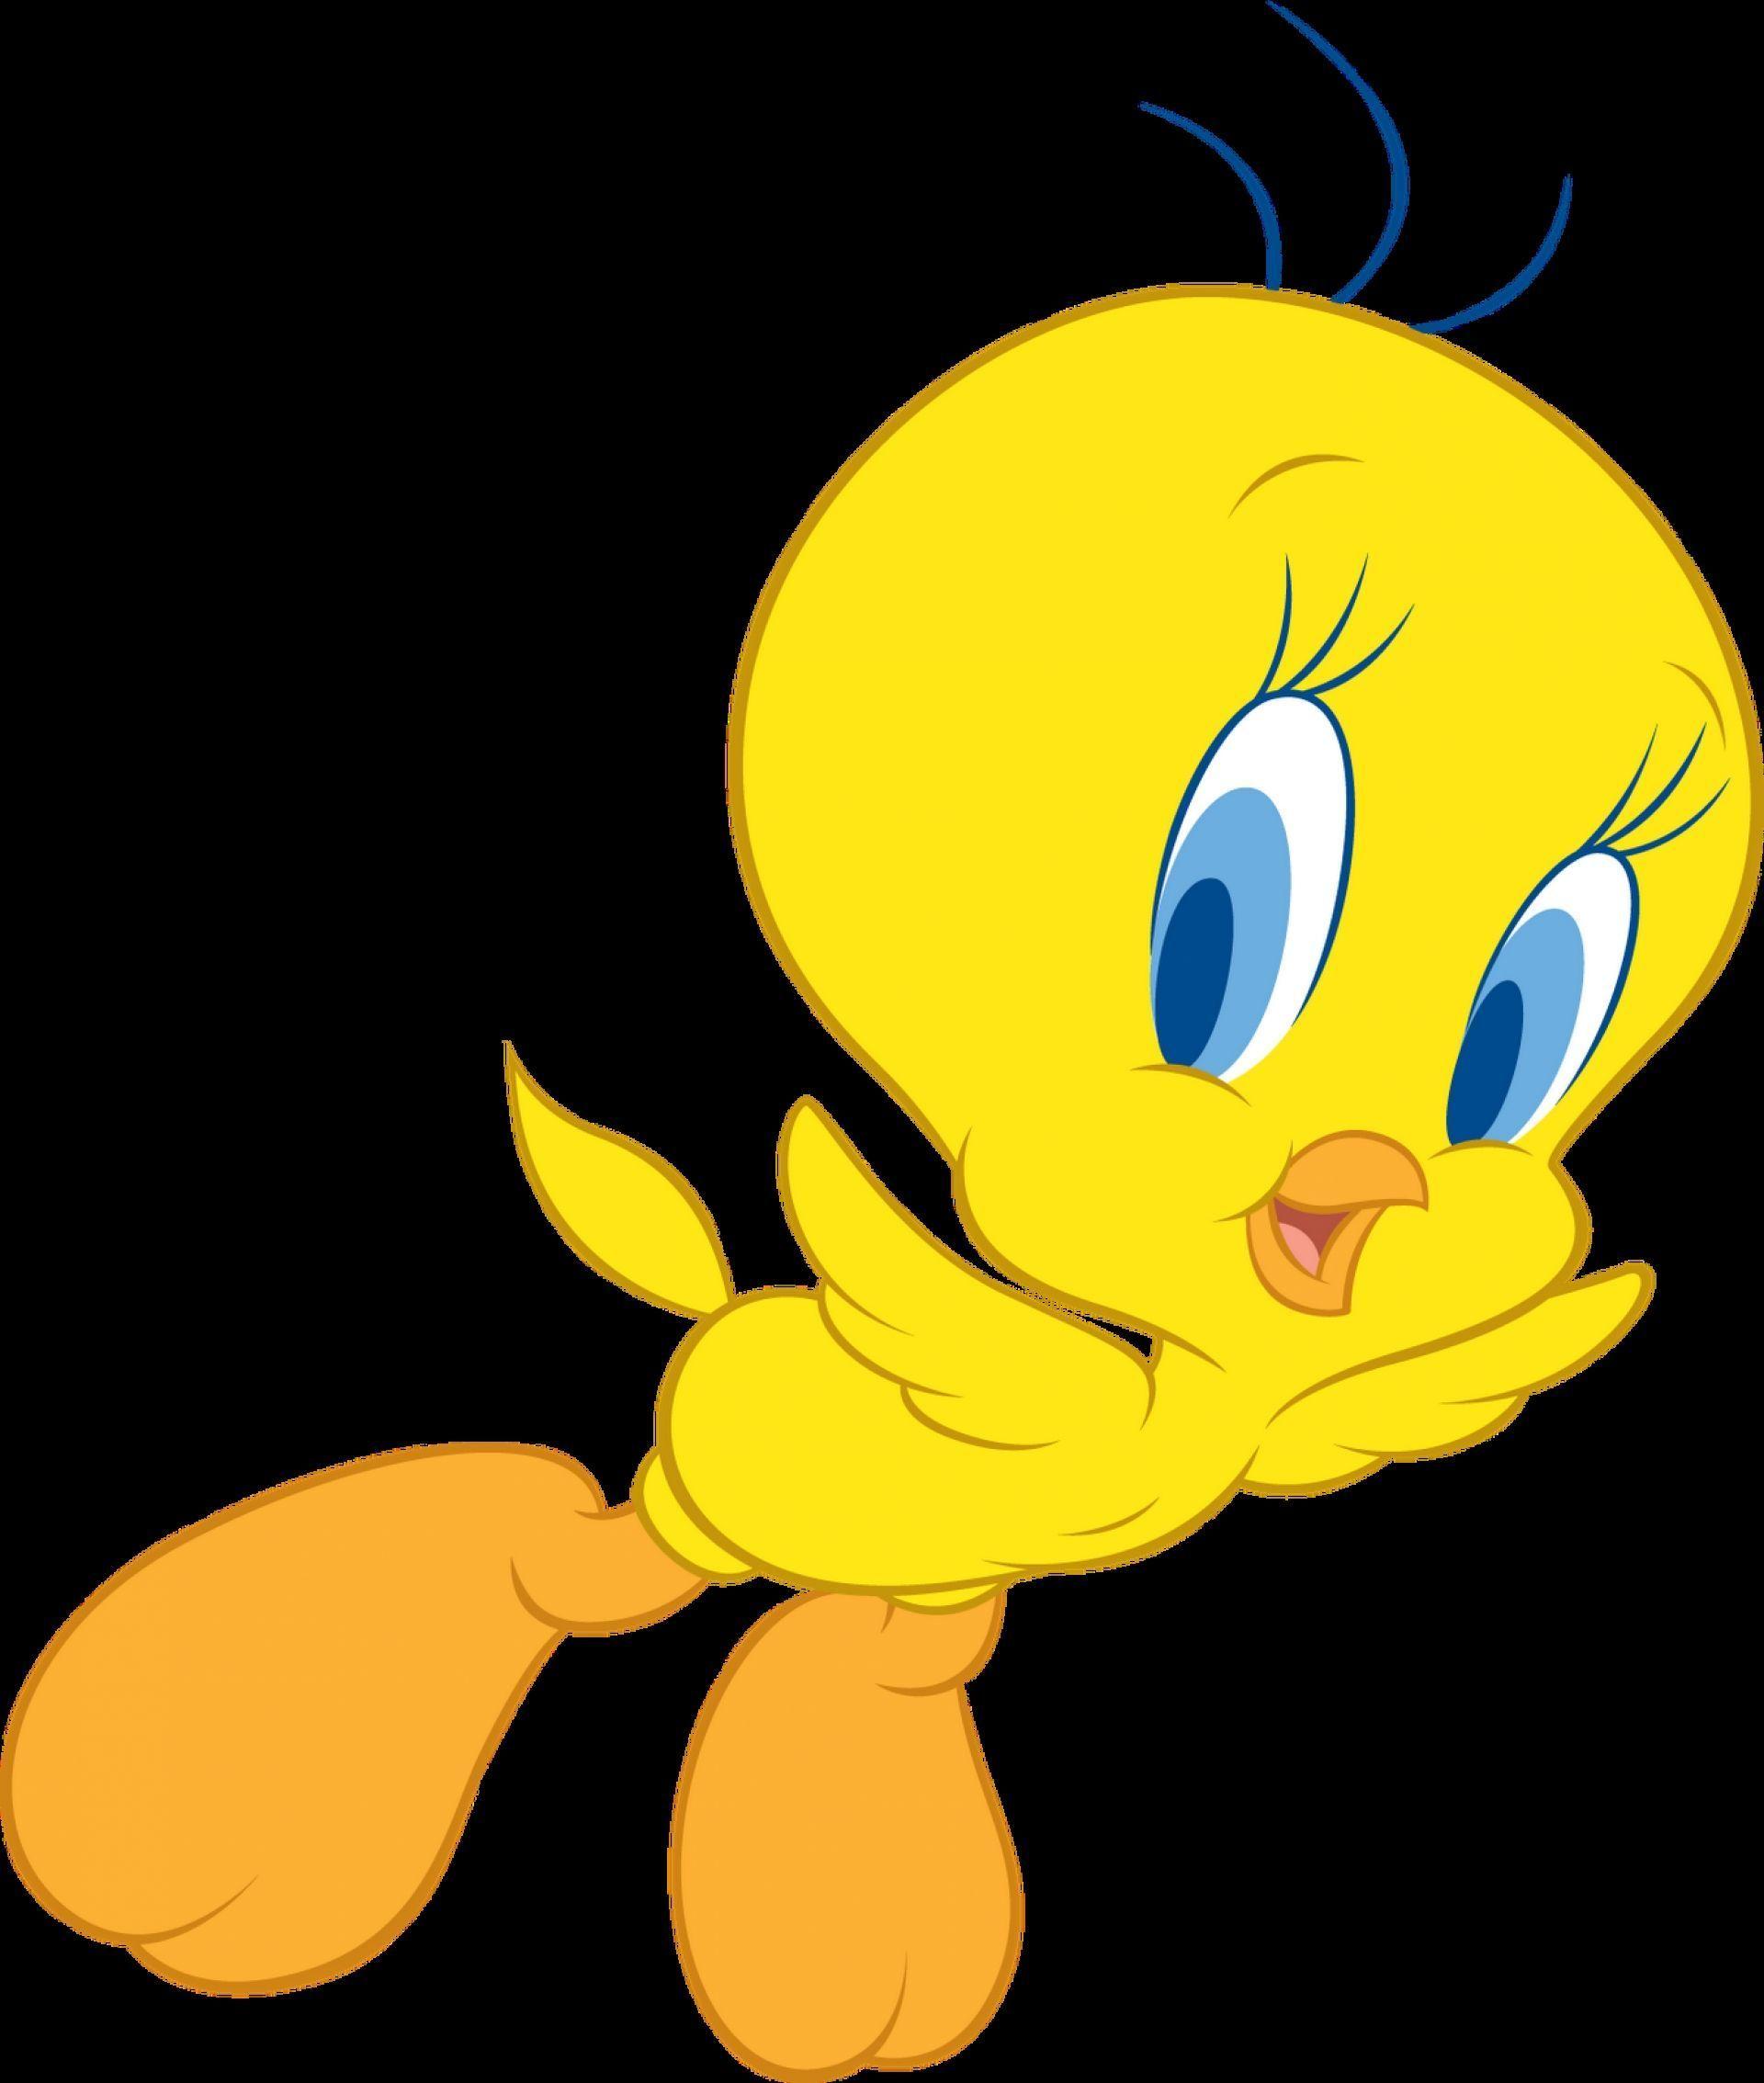 Download Tweety Bird Wallpaper for Android